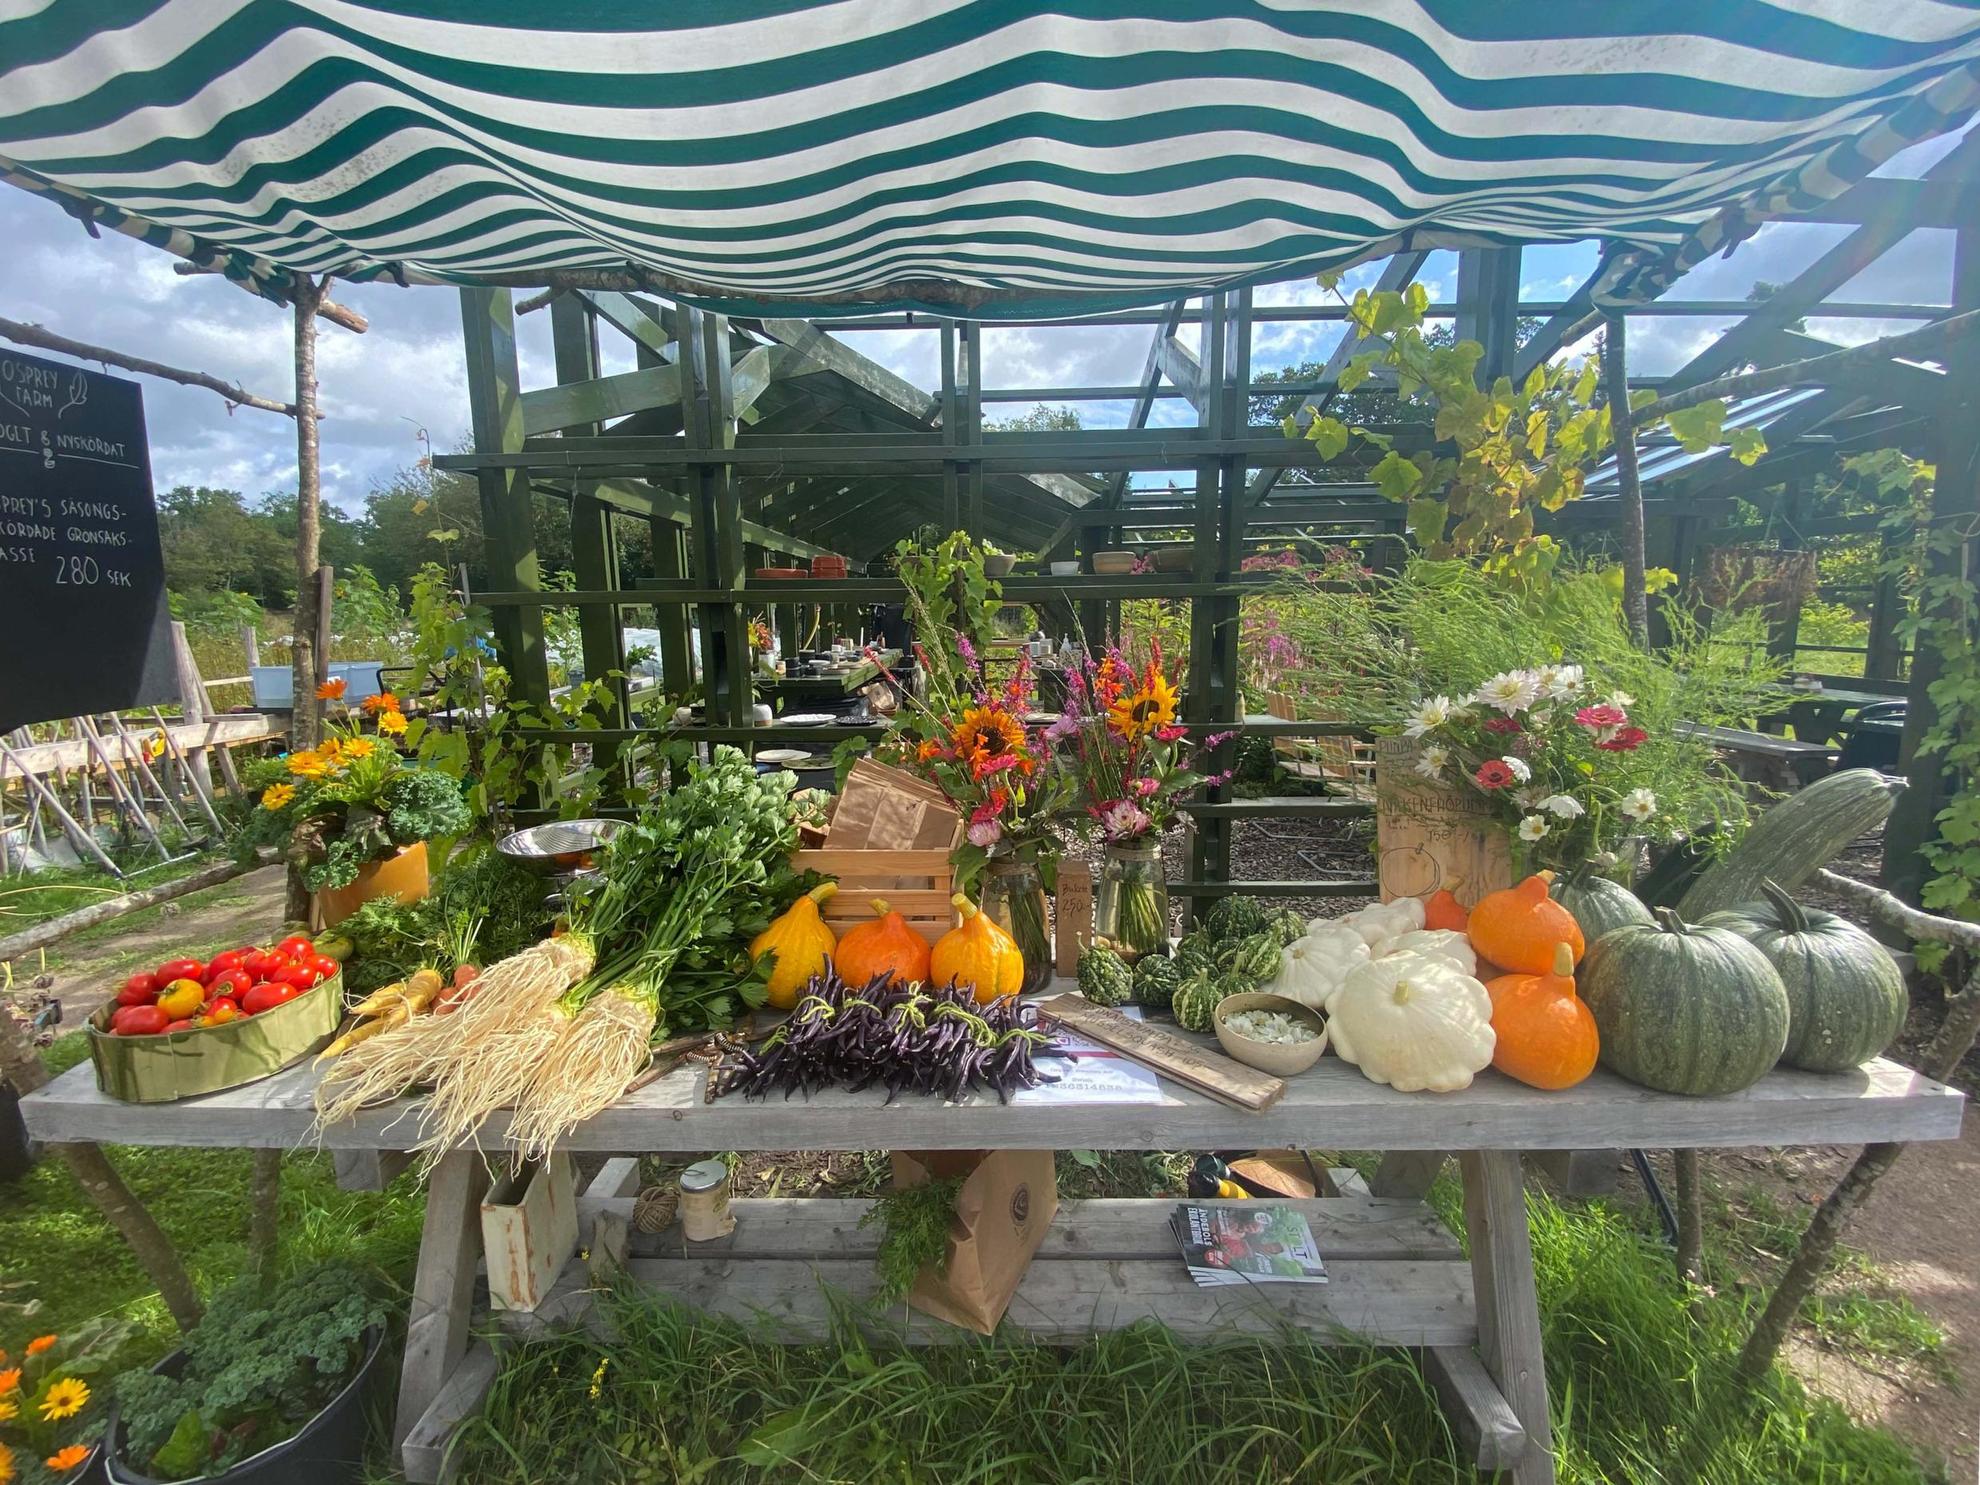 A table is filled with various vegetables such as pumpkins, tomatoes and parsley.